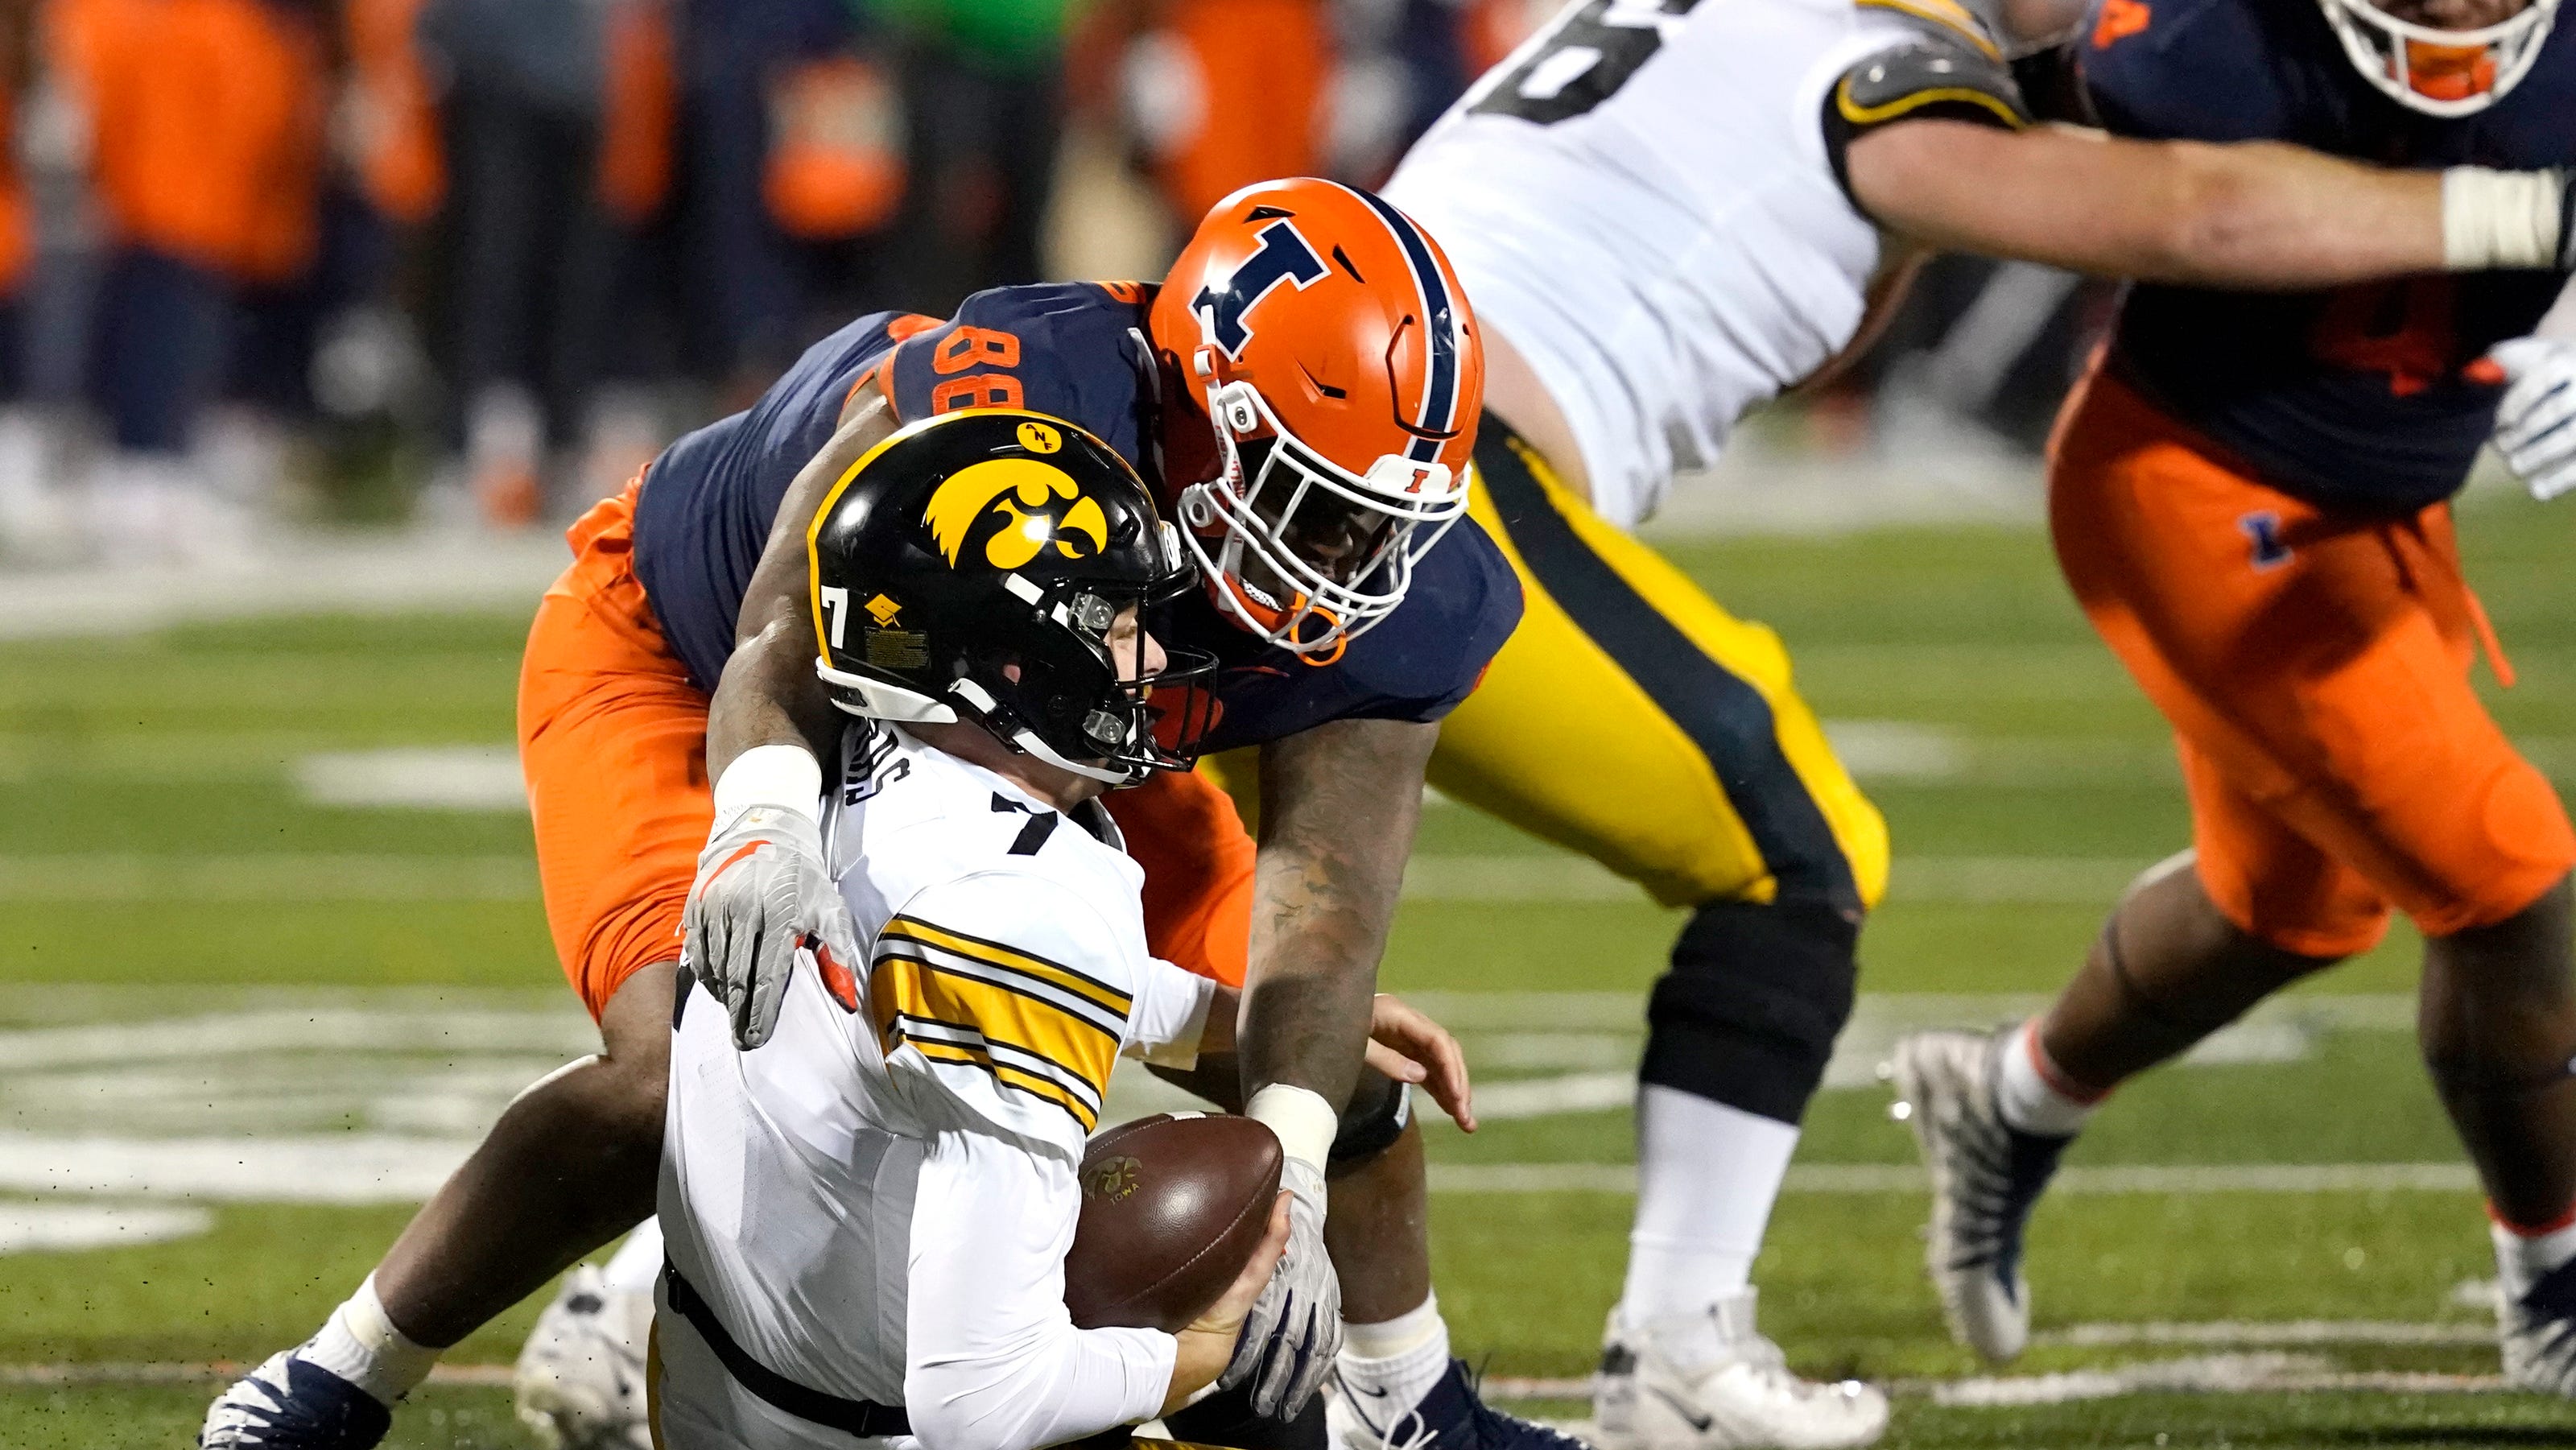 Iowa footbal's biggest offensive problem is clear after Illinois loss